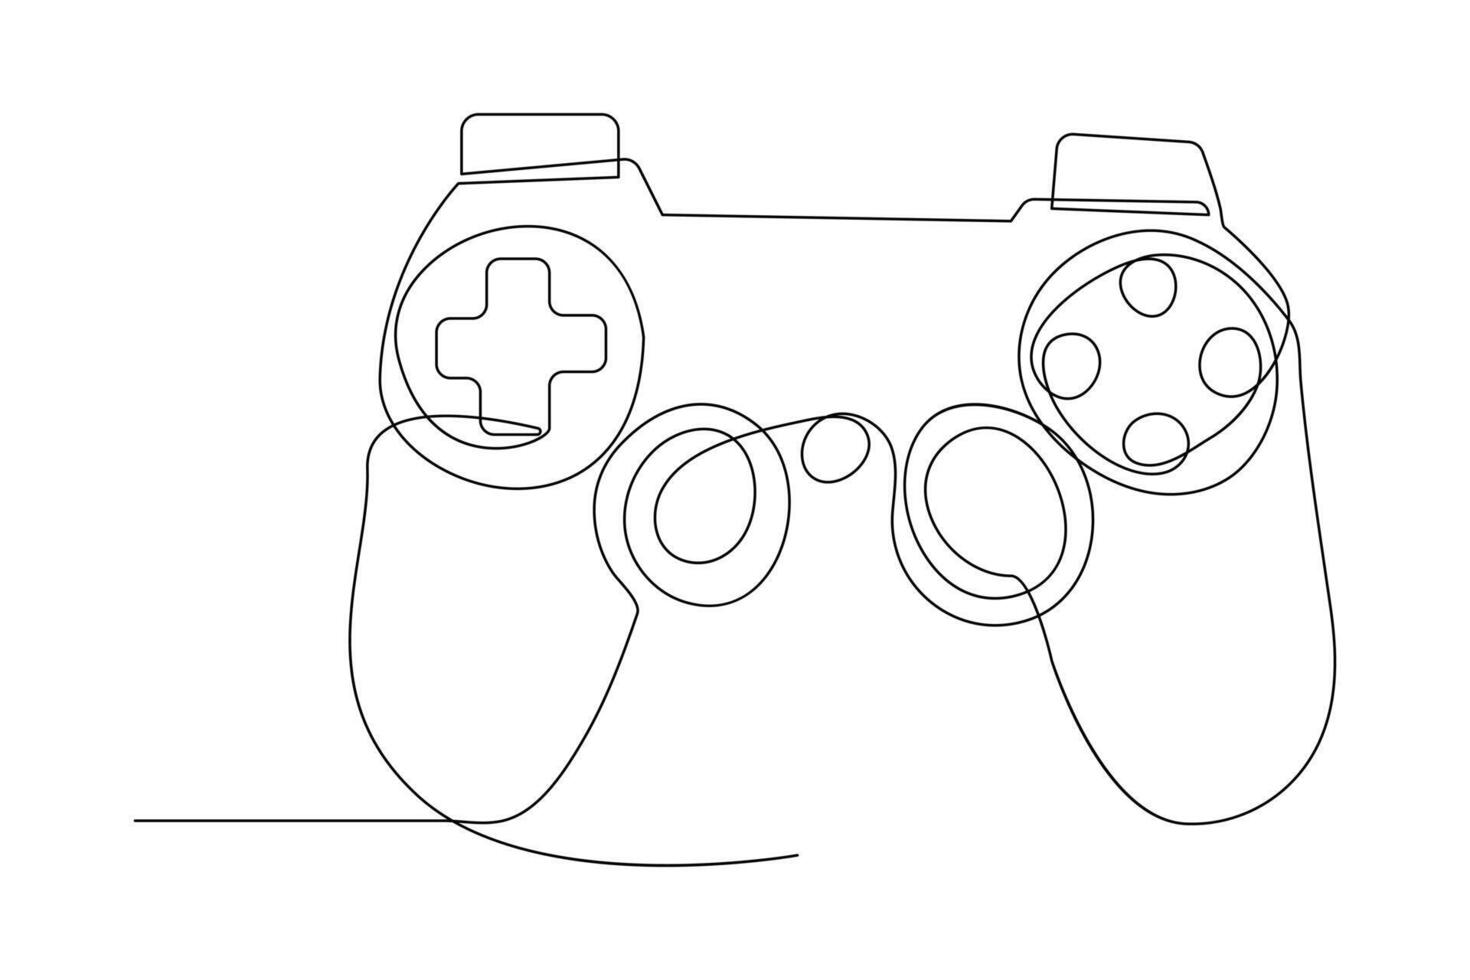 Continuous one line drawing of game stick. Joystick gaming controller. outline vector illustration.